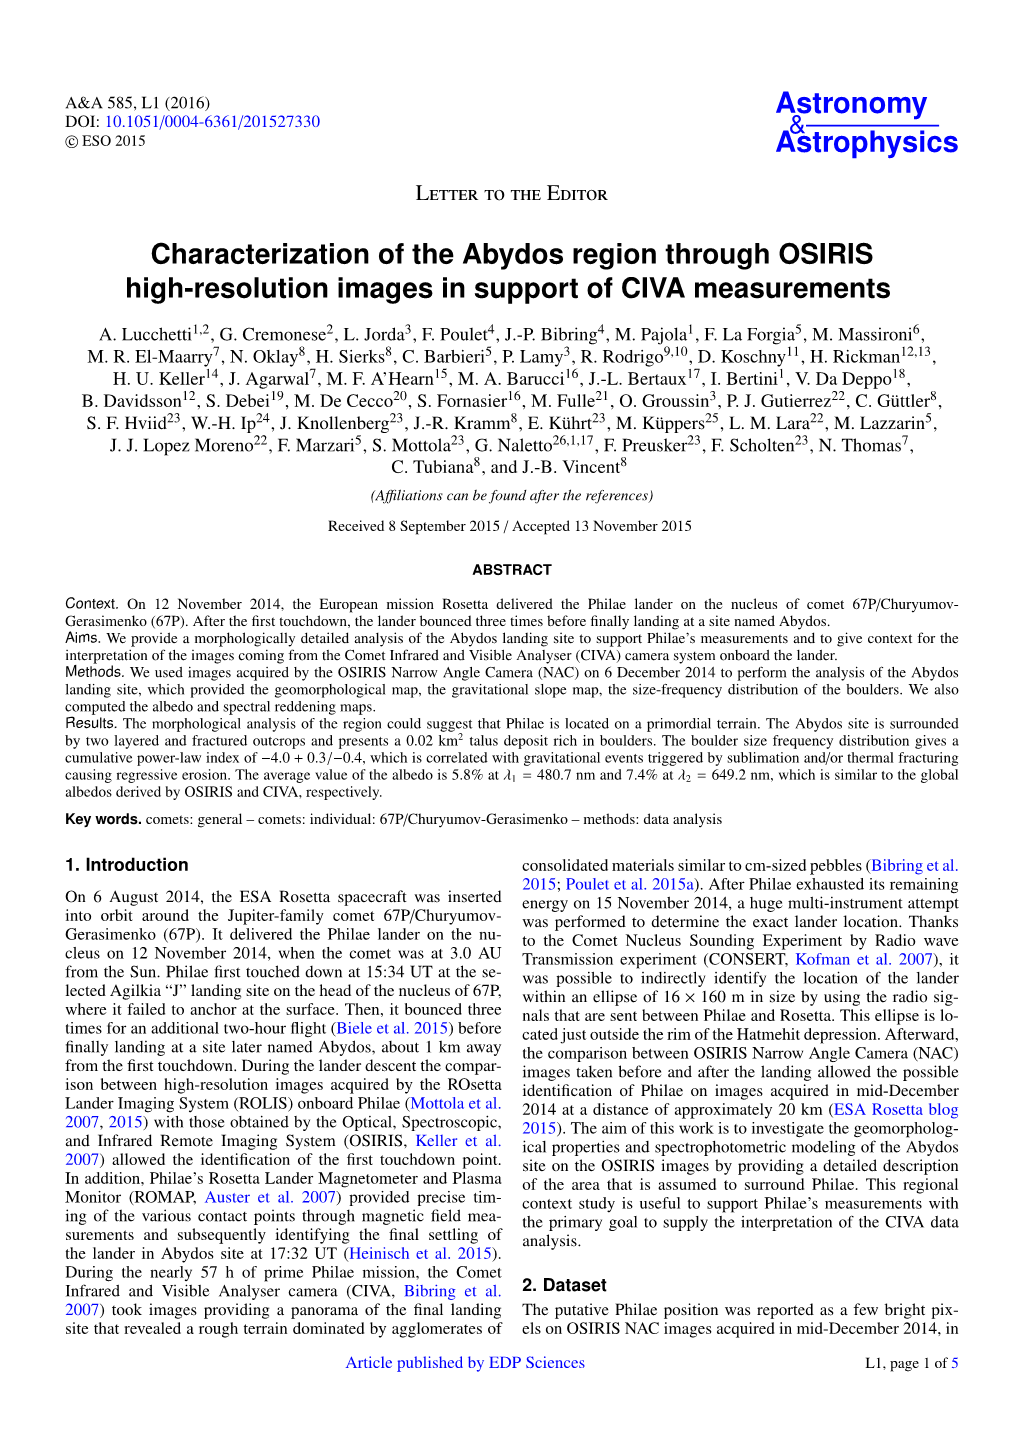 Characterization of the Abydos Region Through OSIRIS High-Resolution Images in Support of CIVA Measurements